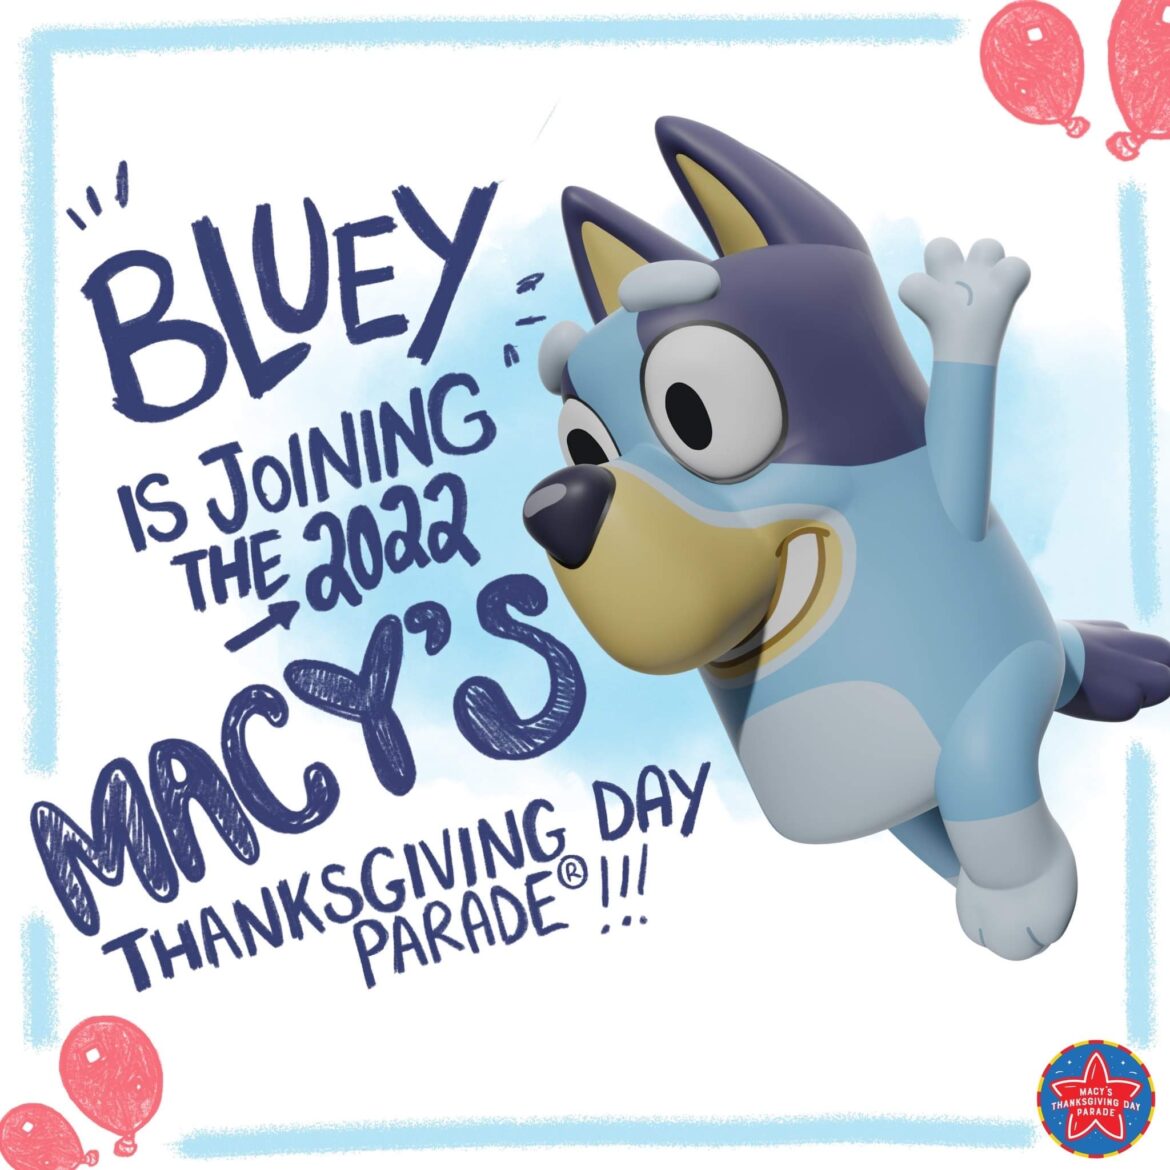 Bluey Balloon Added to Macy’s Thanksgiving Day Parade 2022